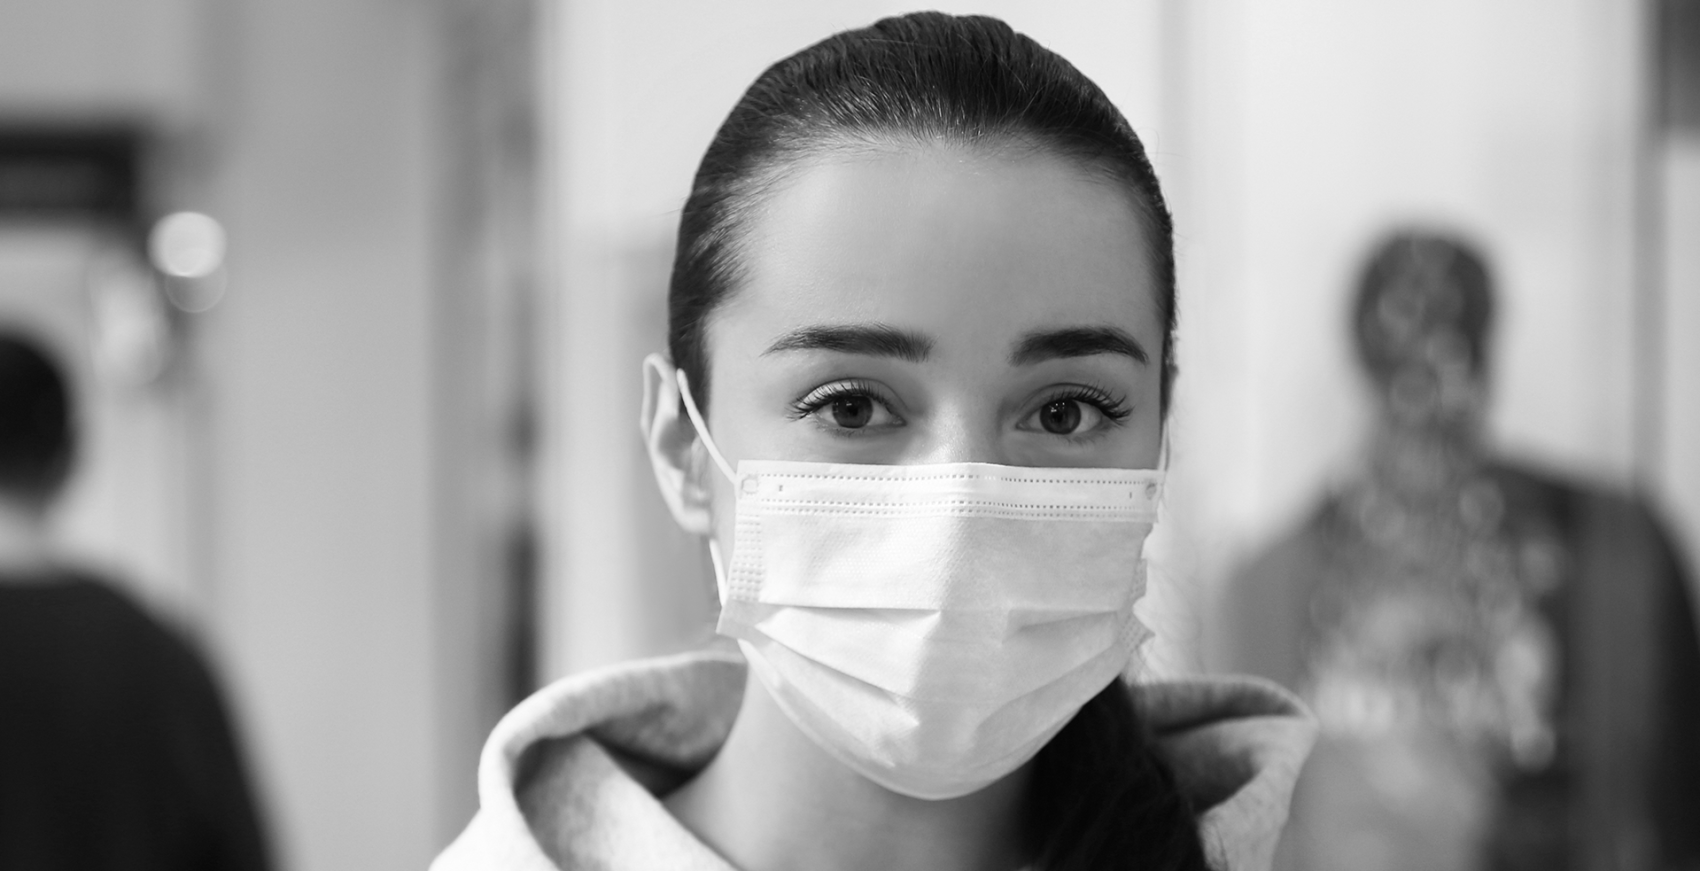 A women wearing a face mask looks into the camera